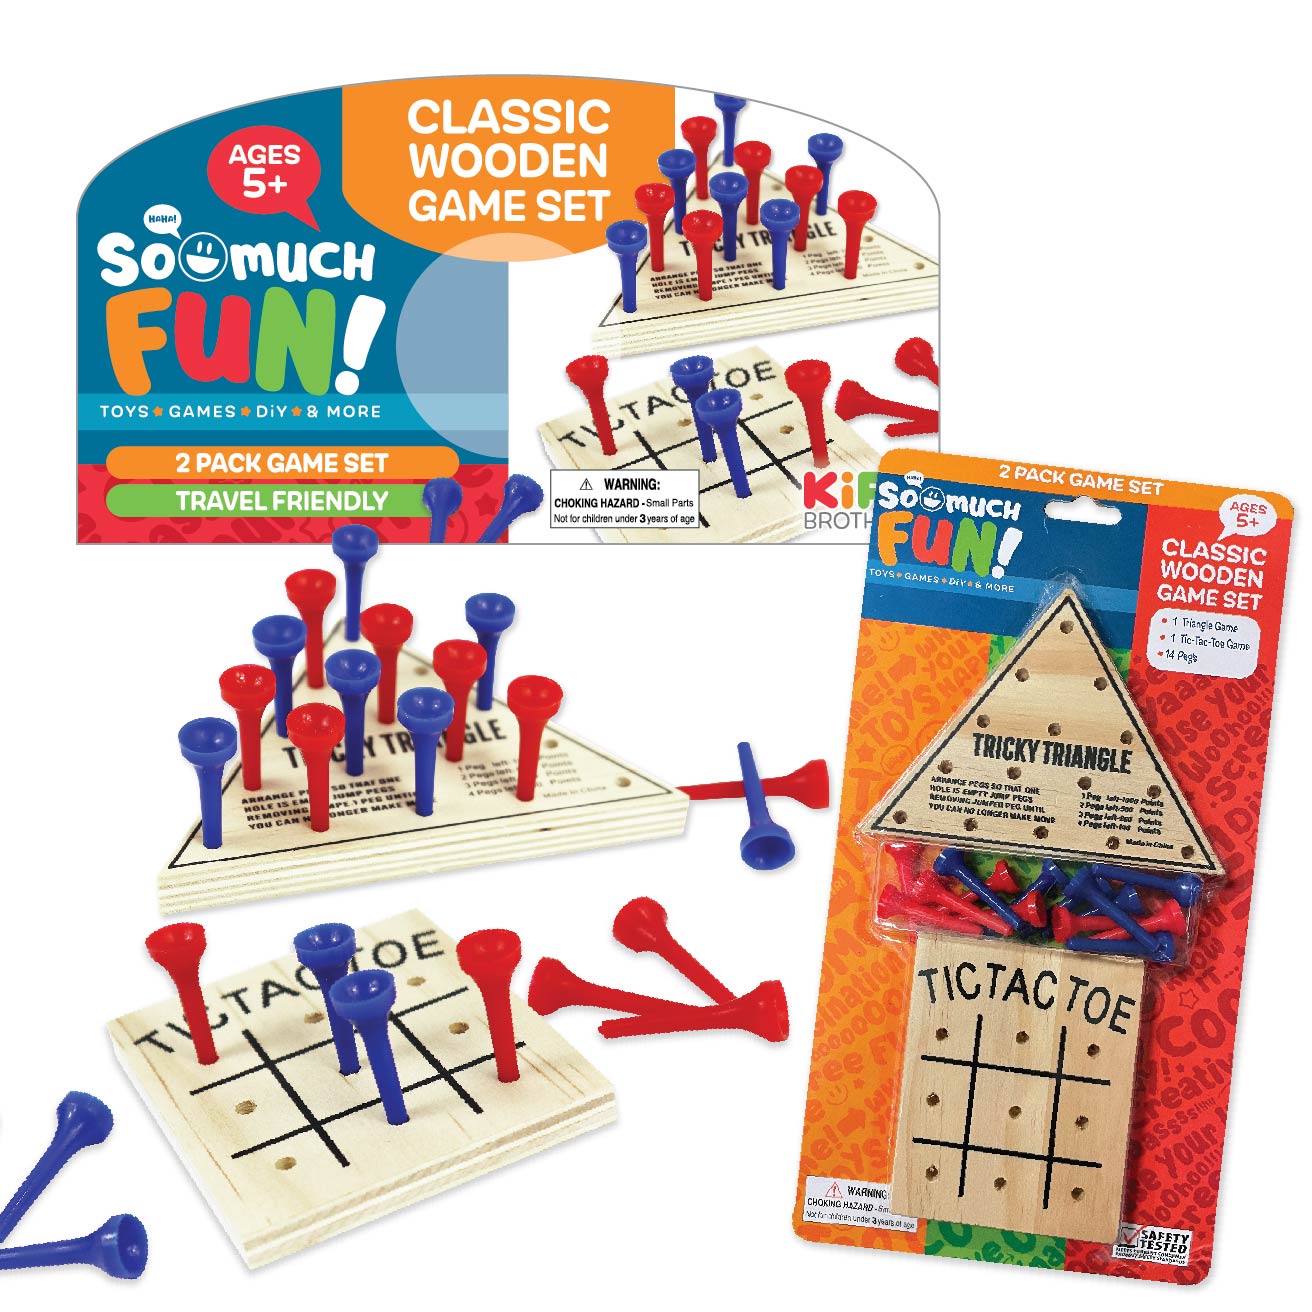 ITEM NUMBER 022943 CLASSIC WOODEN GAMES 2 PACK 12 PIECES PER PACK